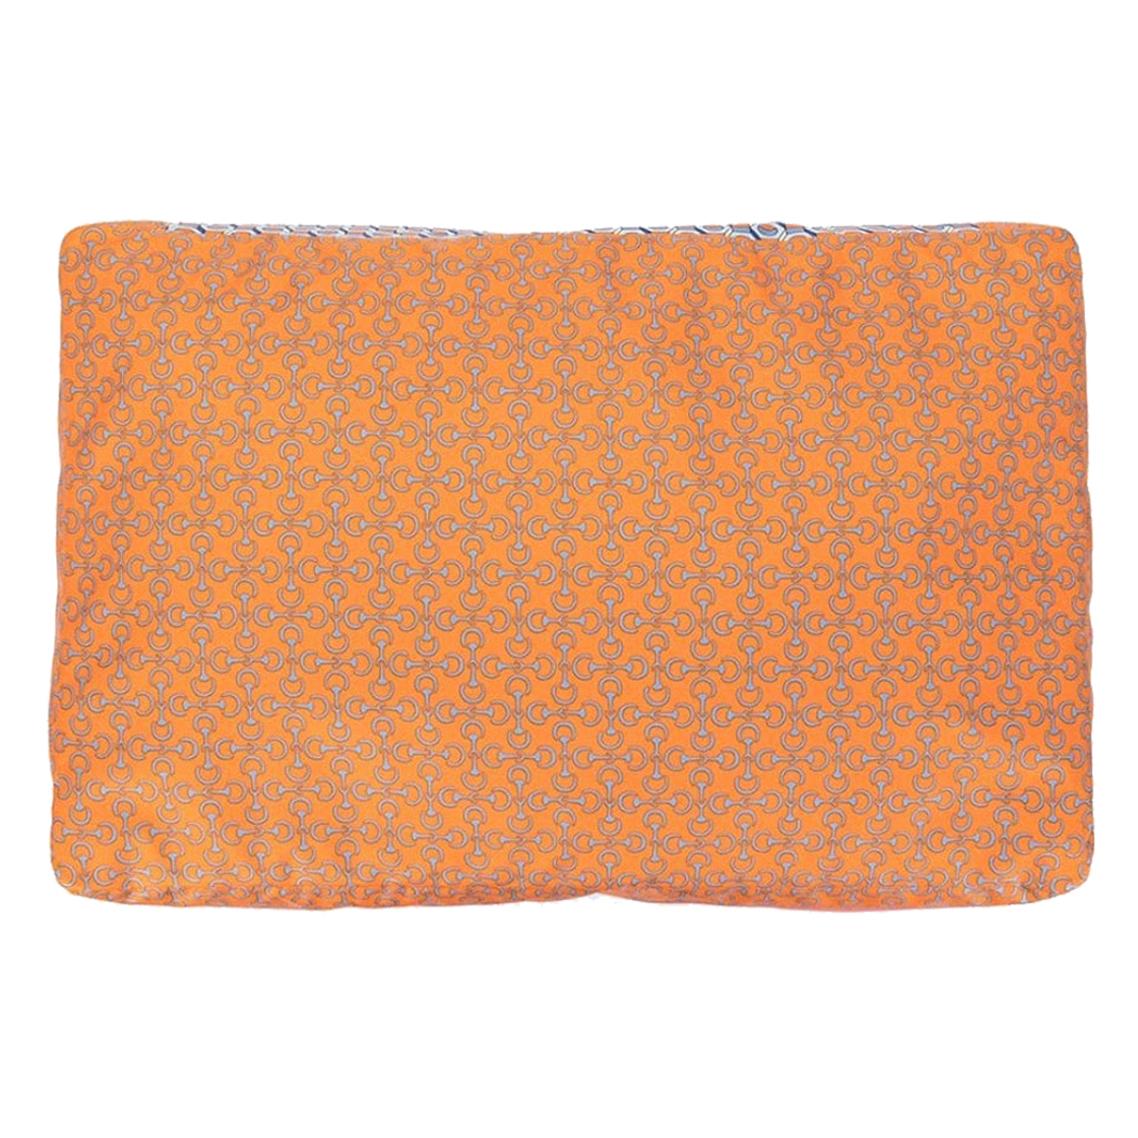 Hermes NEW Silk Orange Chaine Pattern Chair Bed Sofa Cushion Cover Pillow in Box